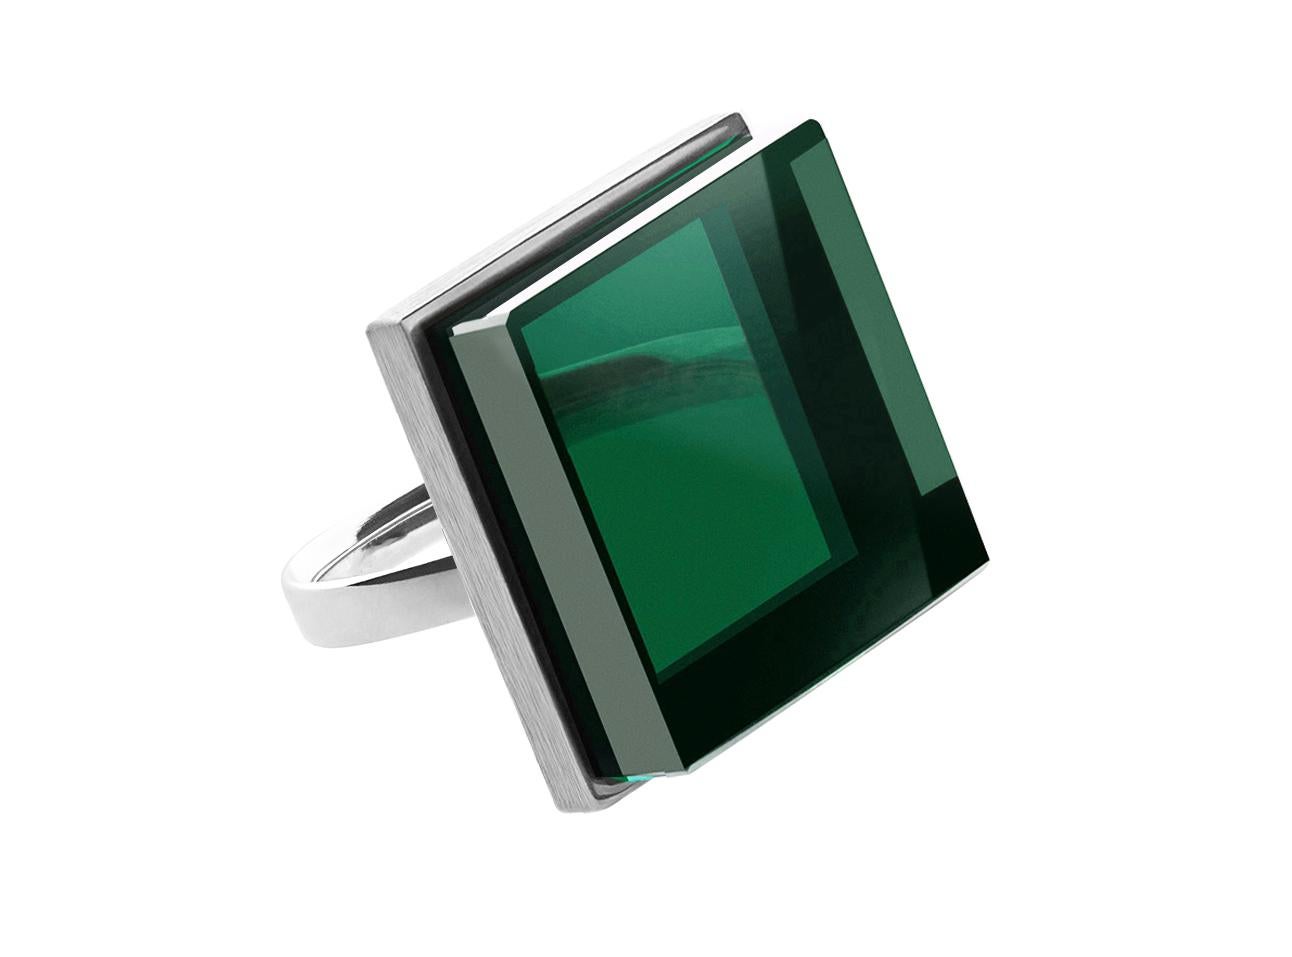 This contemporary fashion ring features a 20x20x6 mm green grown quartz set in 14 karat white gold. It has been featured in Harper's Bazaar and Vogue UA.

The ring has an art deco feel and is suitable for both women and men. Its unique cut allows